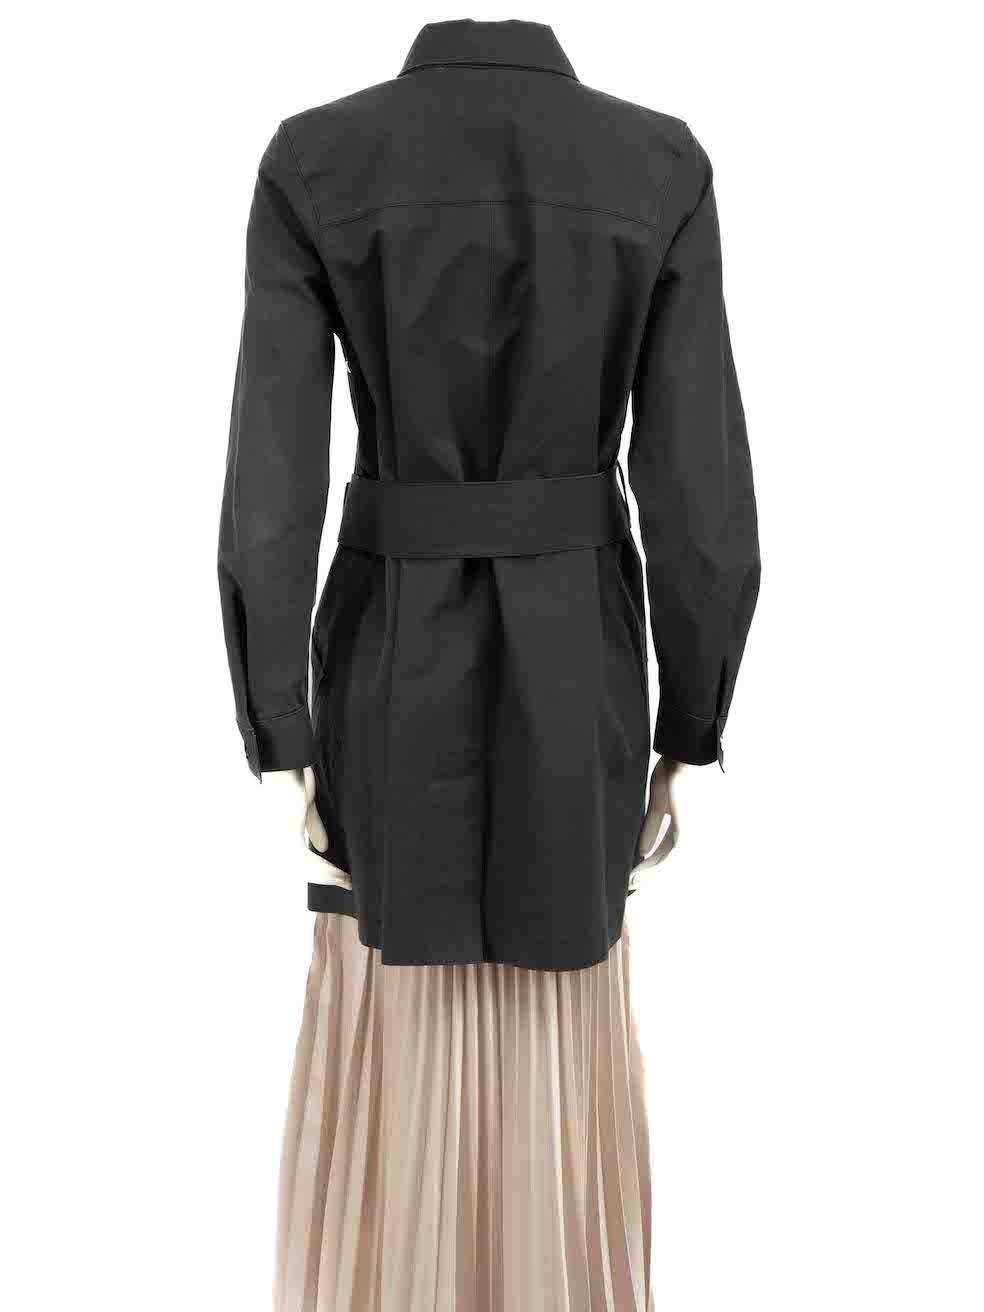 Louis Vuitton Black Belted Mid-Length Trench Coat Size M In Good Condition For Sale In London, GB